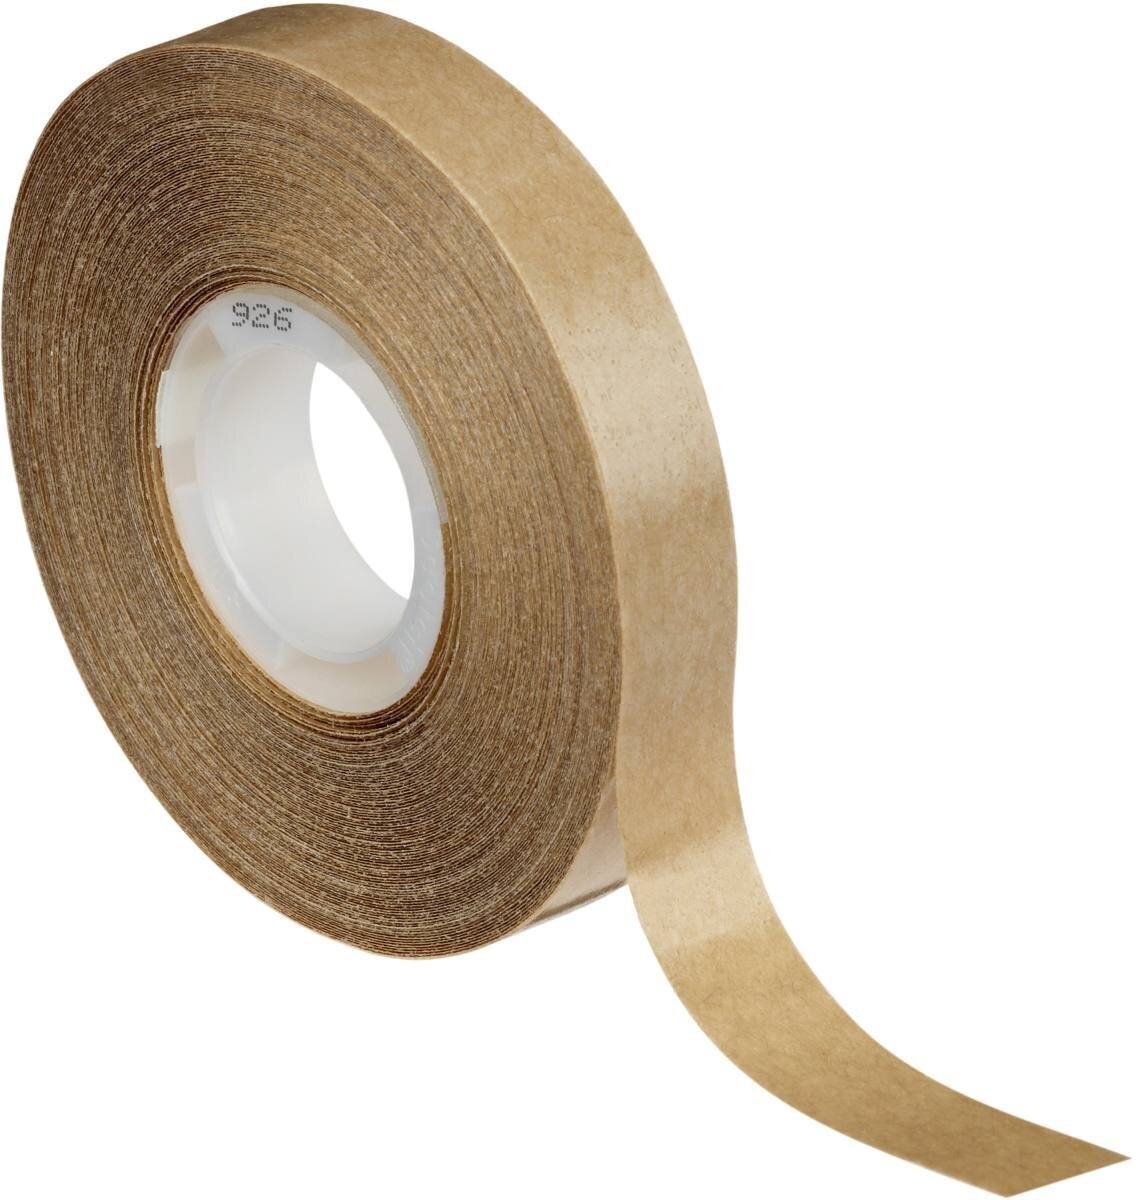 3M™ 9415PC Removable Double Sided Film Tapes